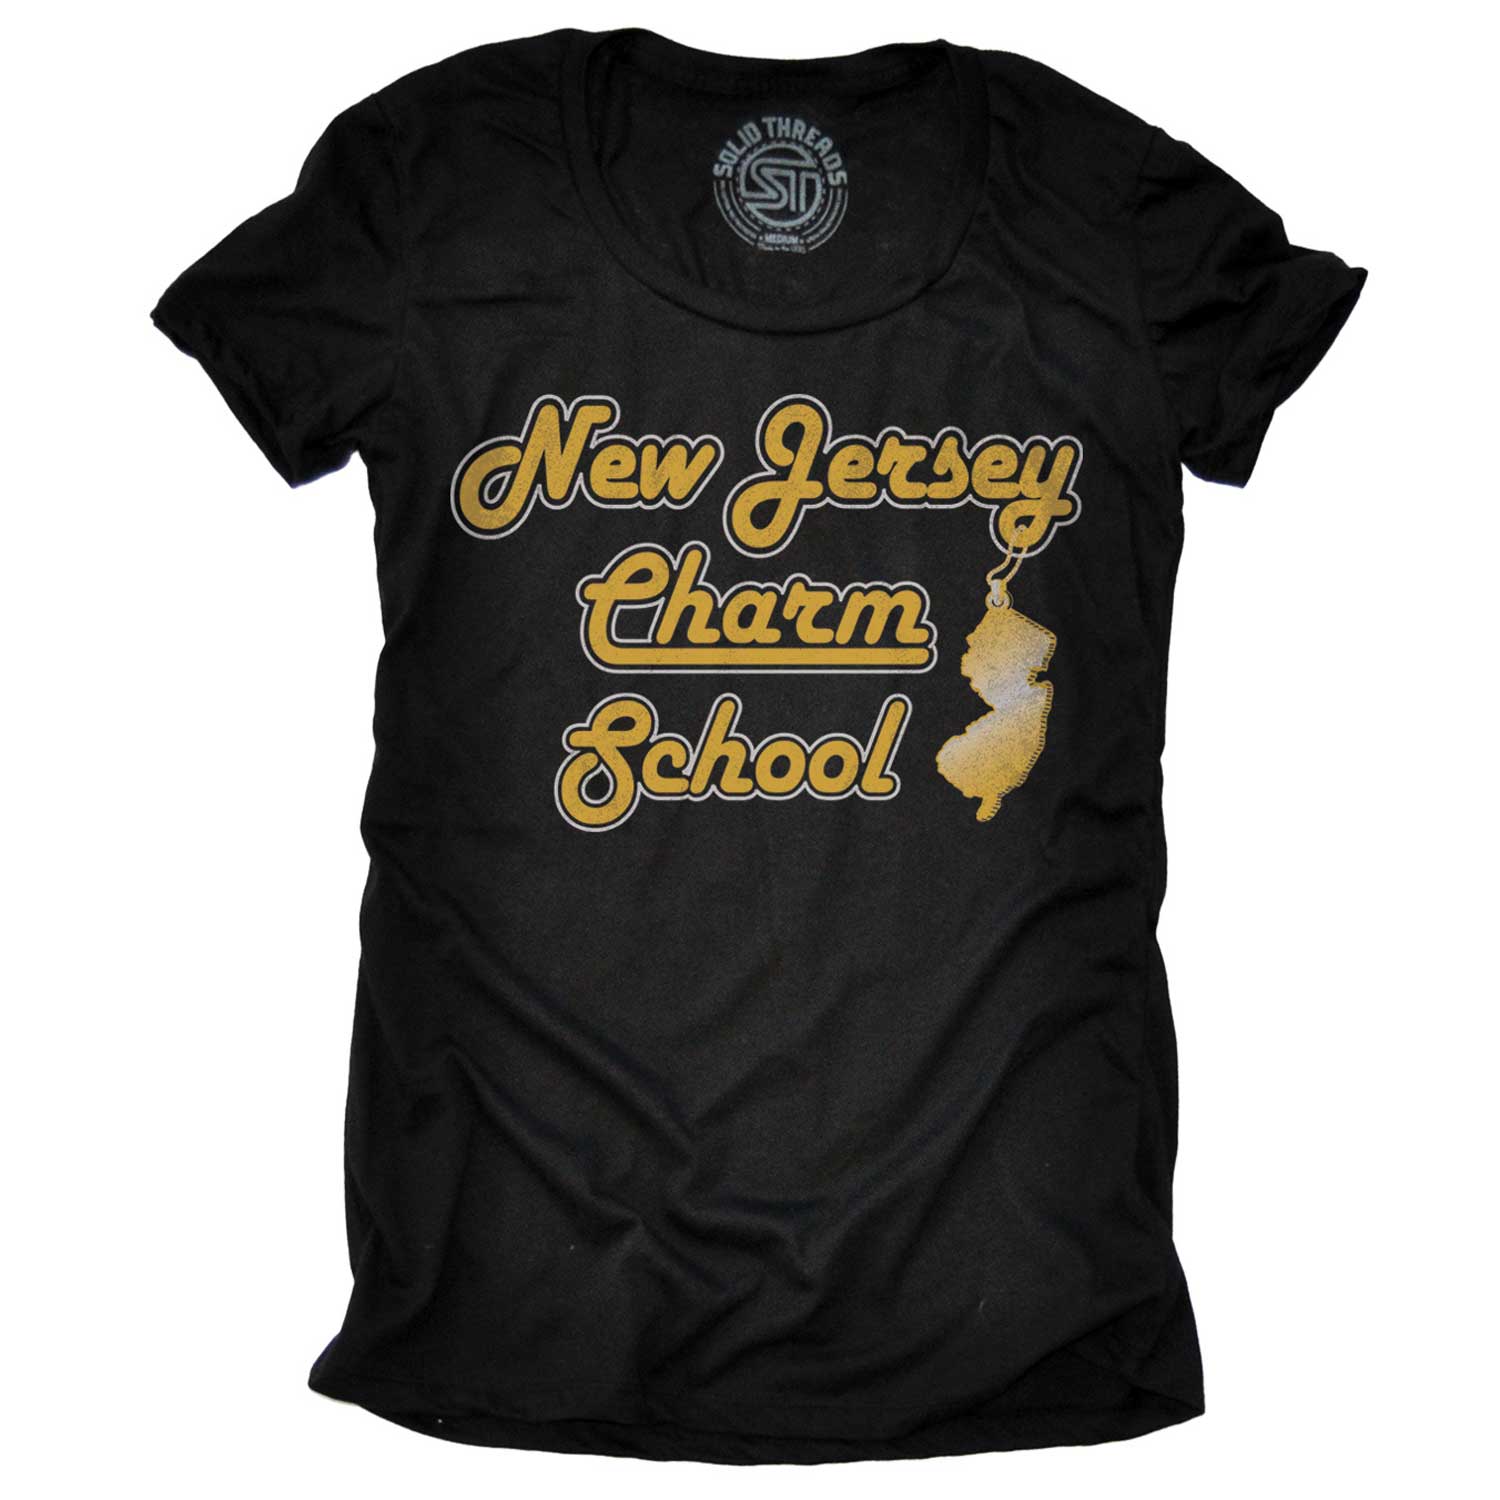 Women's New Jersey Charm School Vintage Graphic T-Shirt | Funny Garden State Tee | Solid Threads